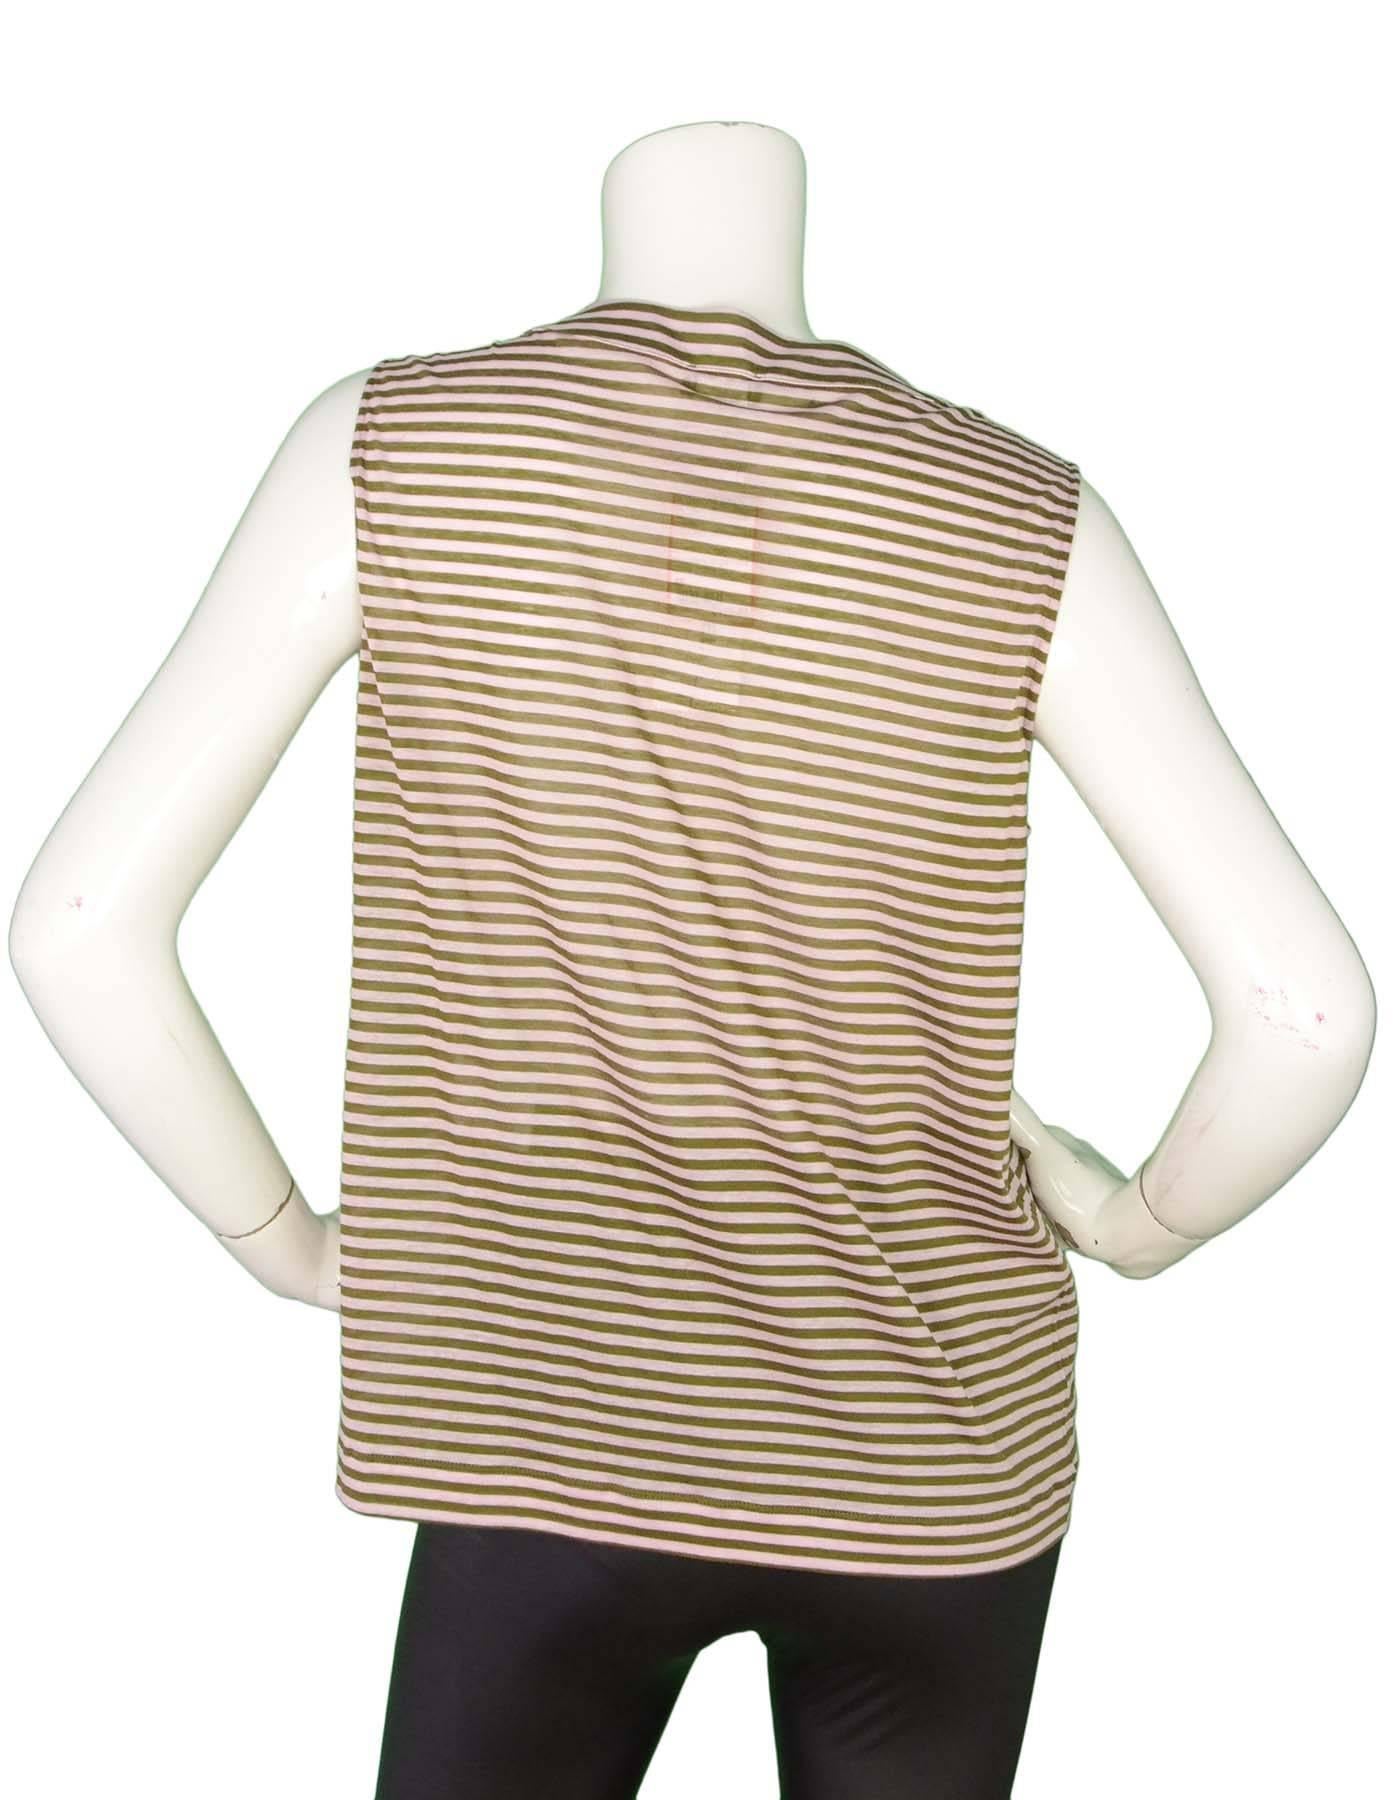 Beige Chanel Pink and Green Sleeveless Striped Top with Ruffles sz 48 rt. $1, 380